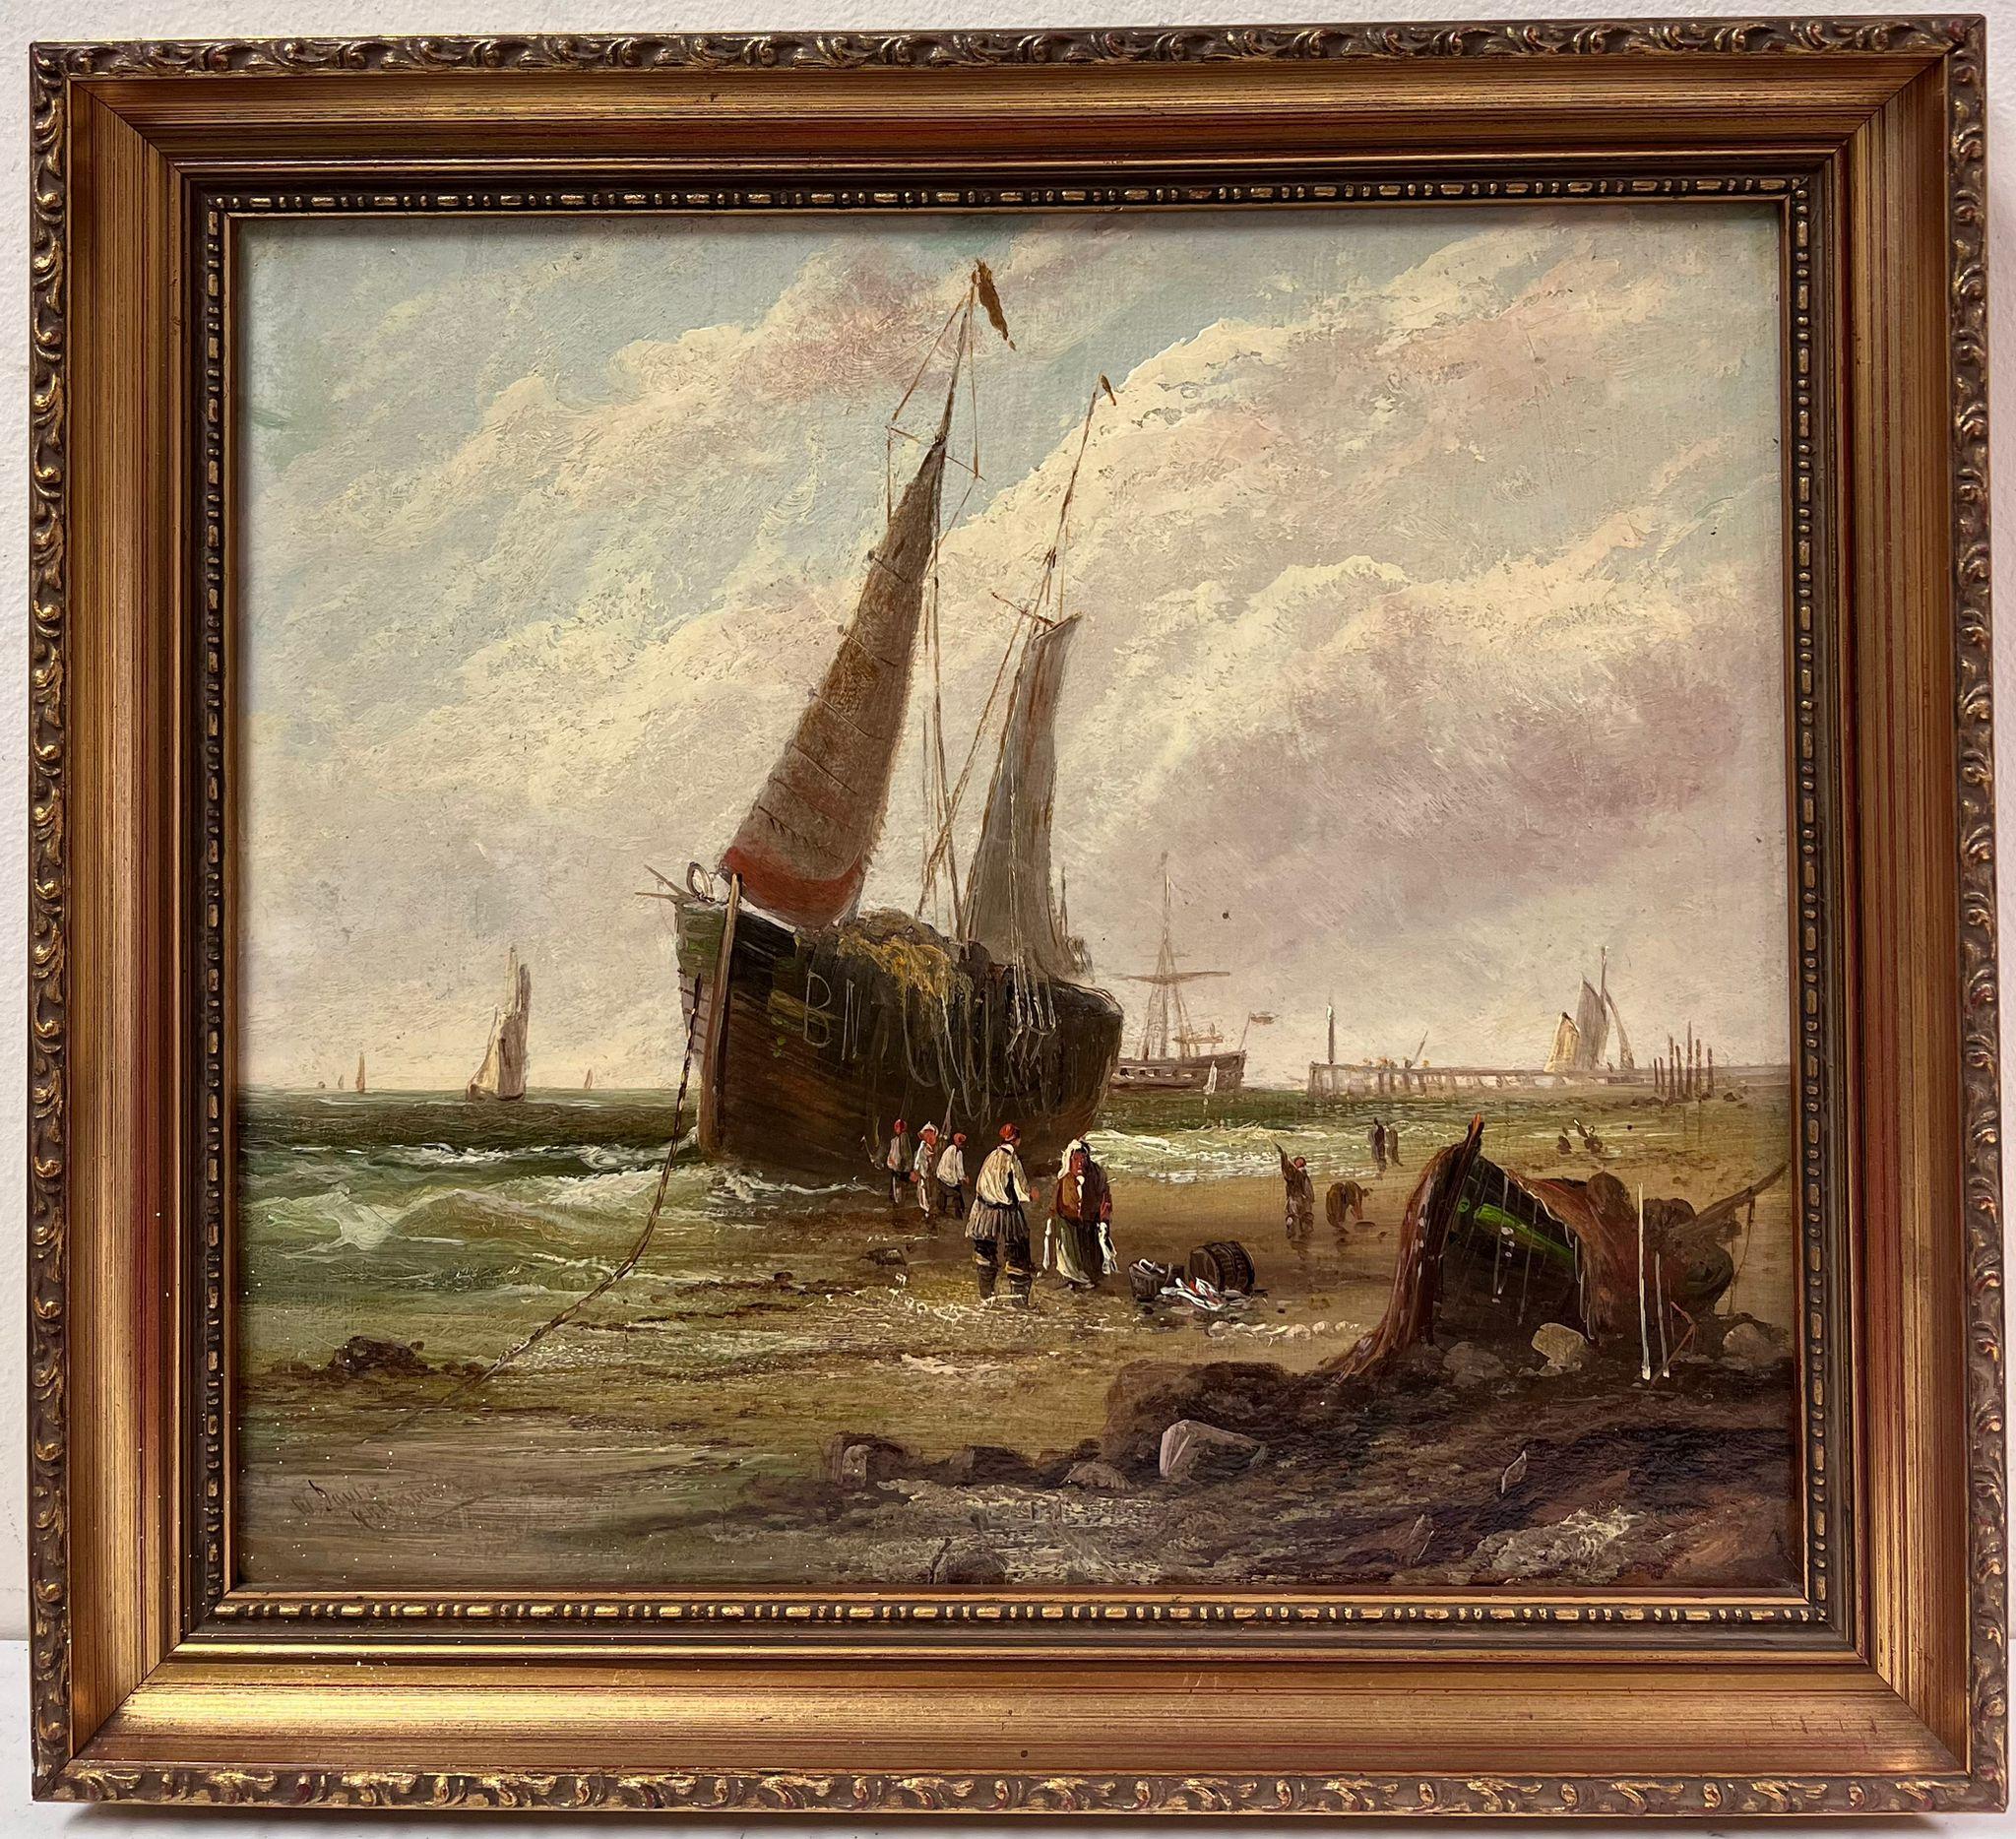 Antique British Figurative Painting - 19th Century British Oil Painting Fisherfolk on Shore with Boats Signed original